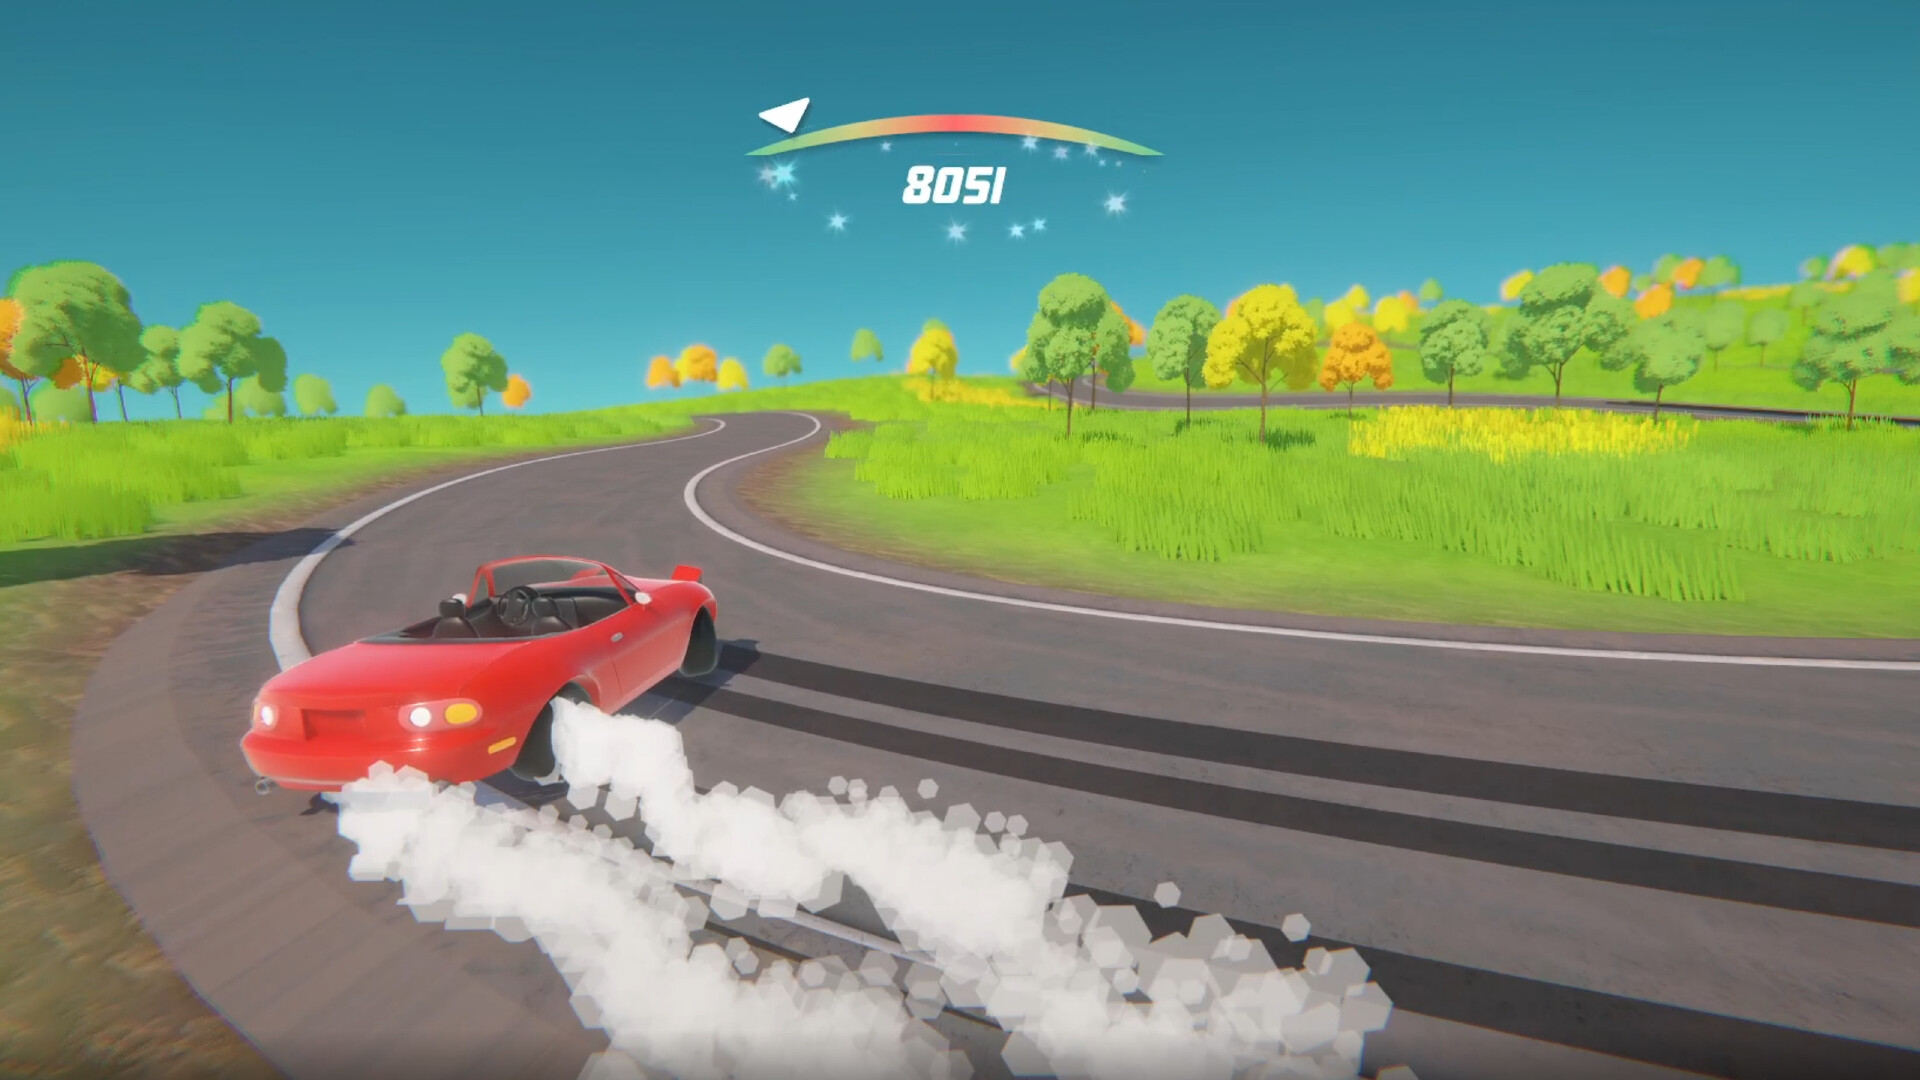 Drift With Your Pals on Steam